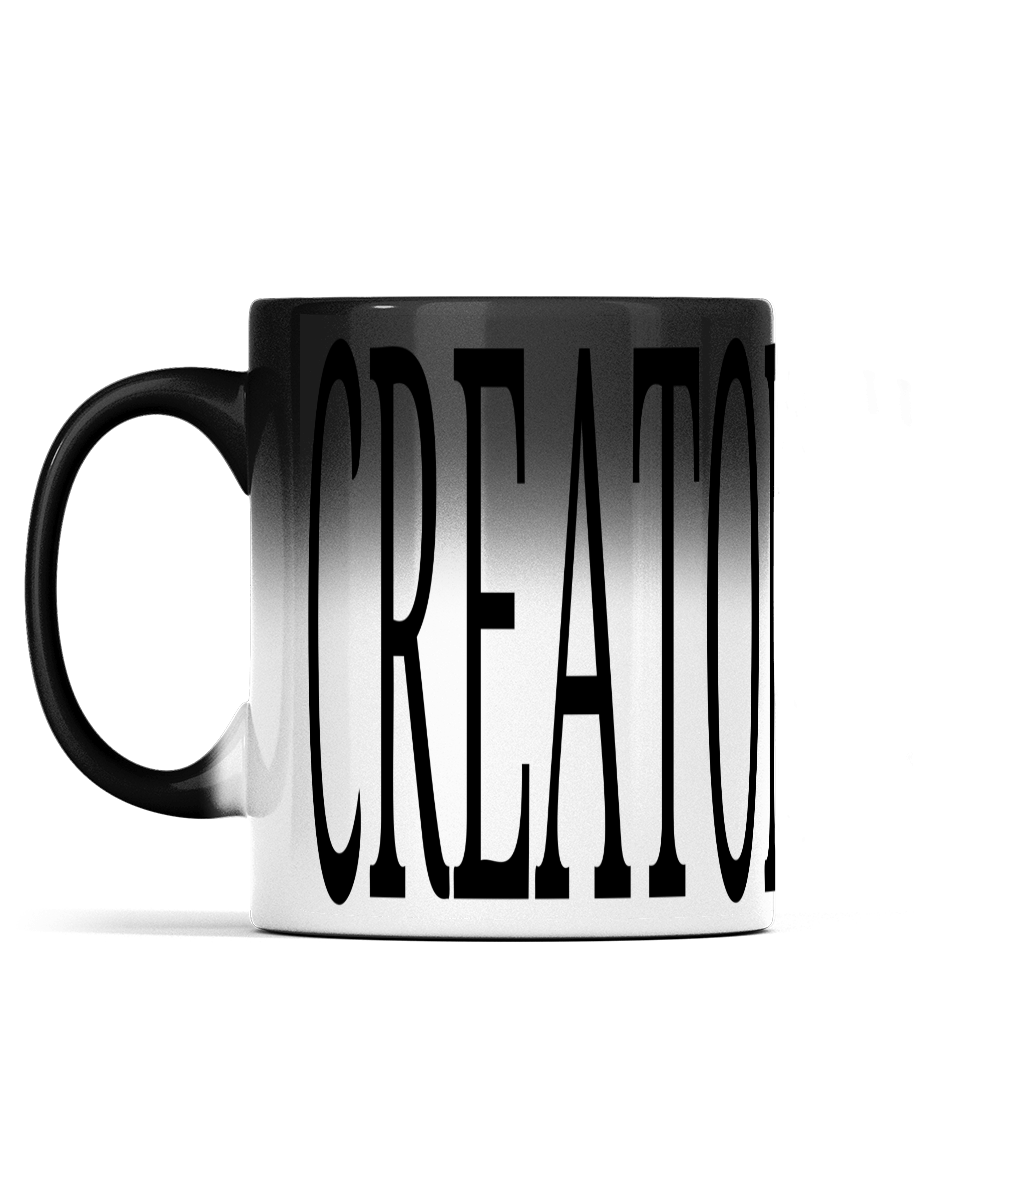 11oz CREATOR Colour Changing Mug For Tea, Coffee Or Hot Drinks Black Colour When Cold CREATOR Appears And Turns To White Ceramic Tea Cup When Warm